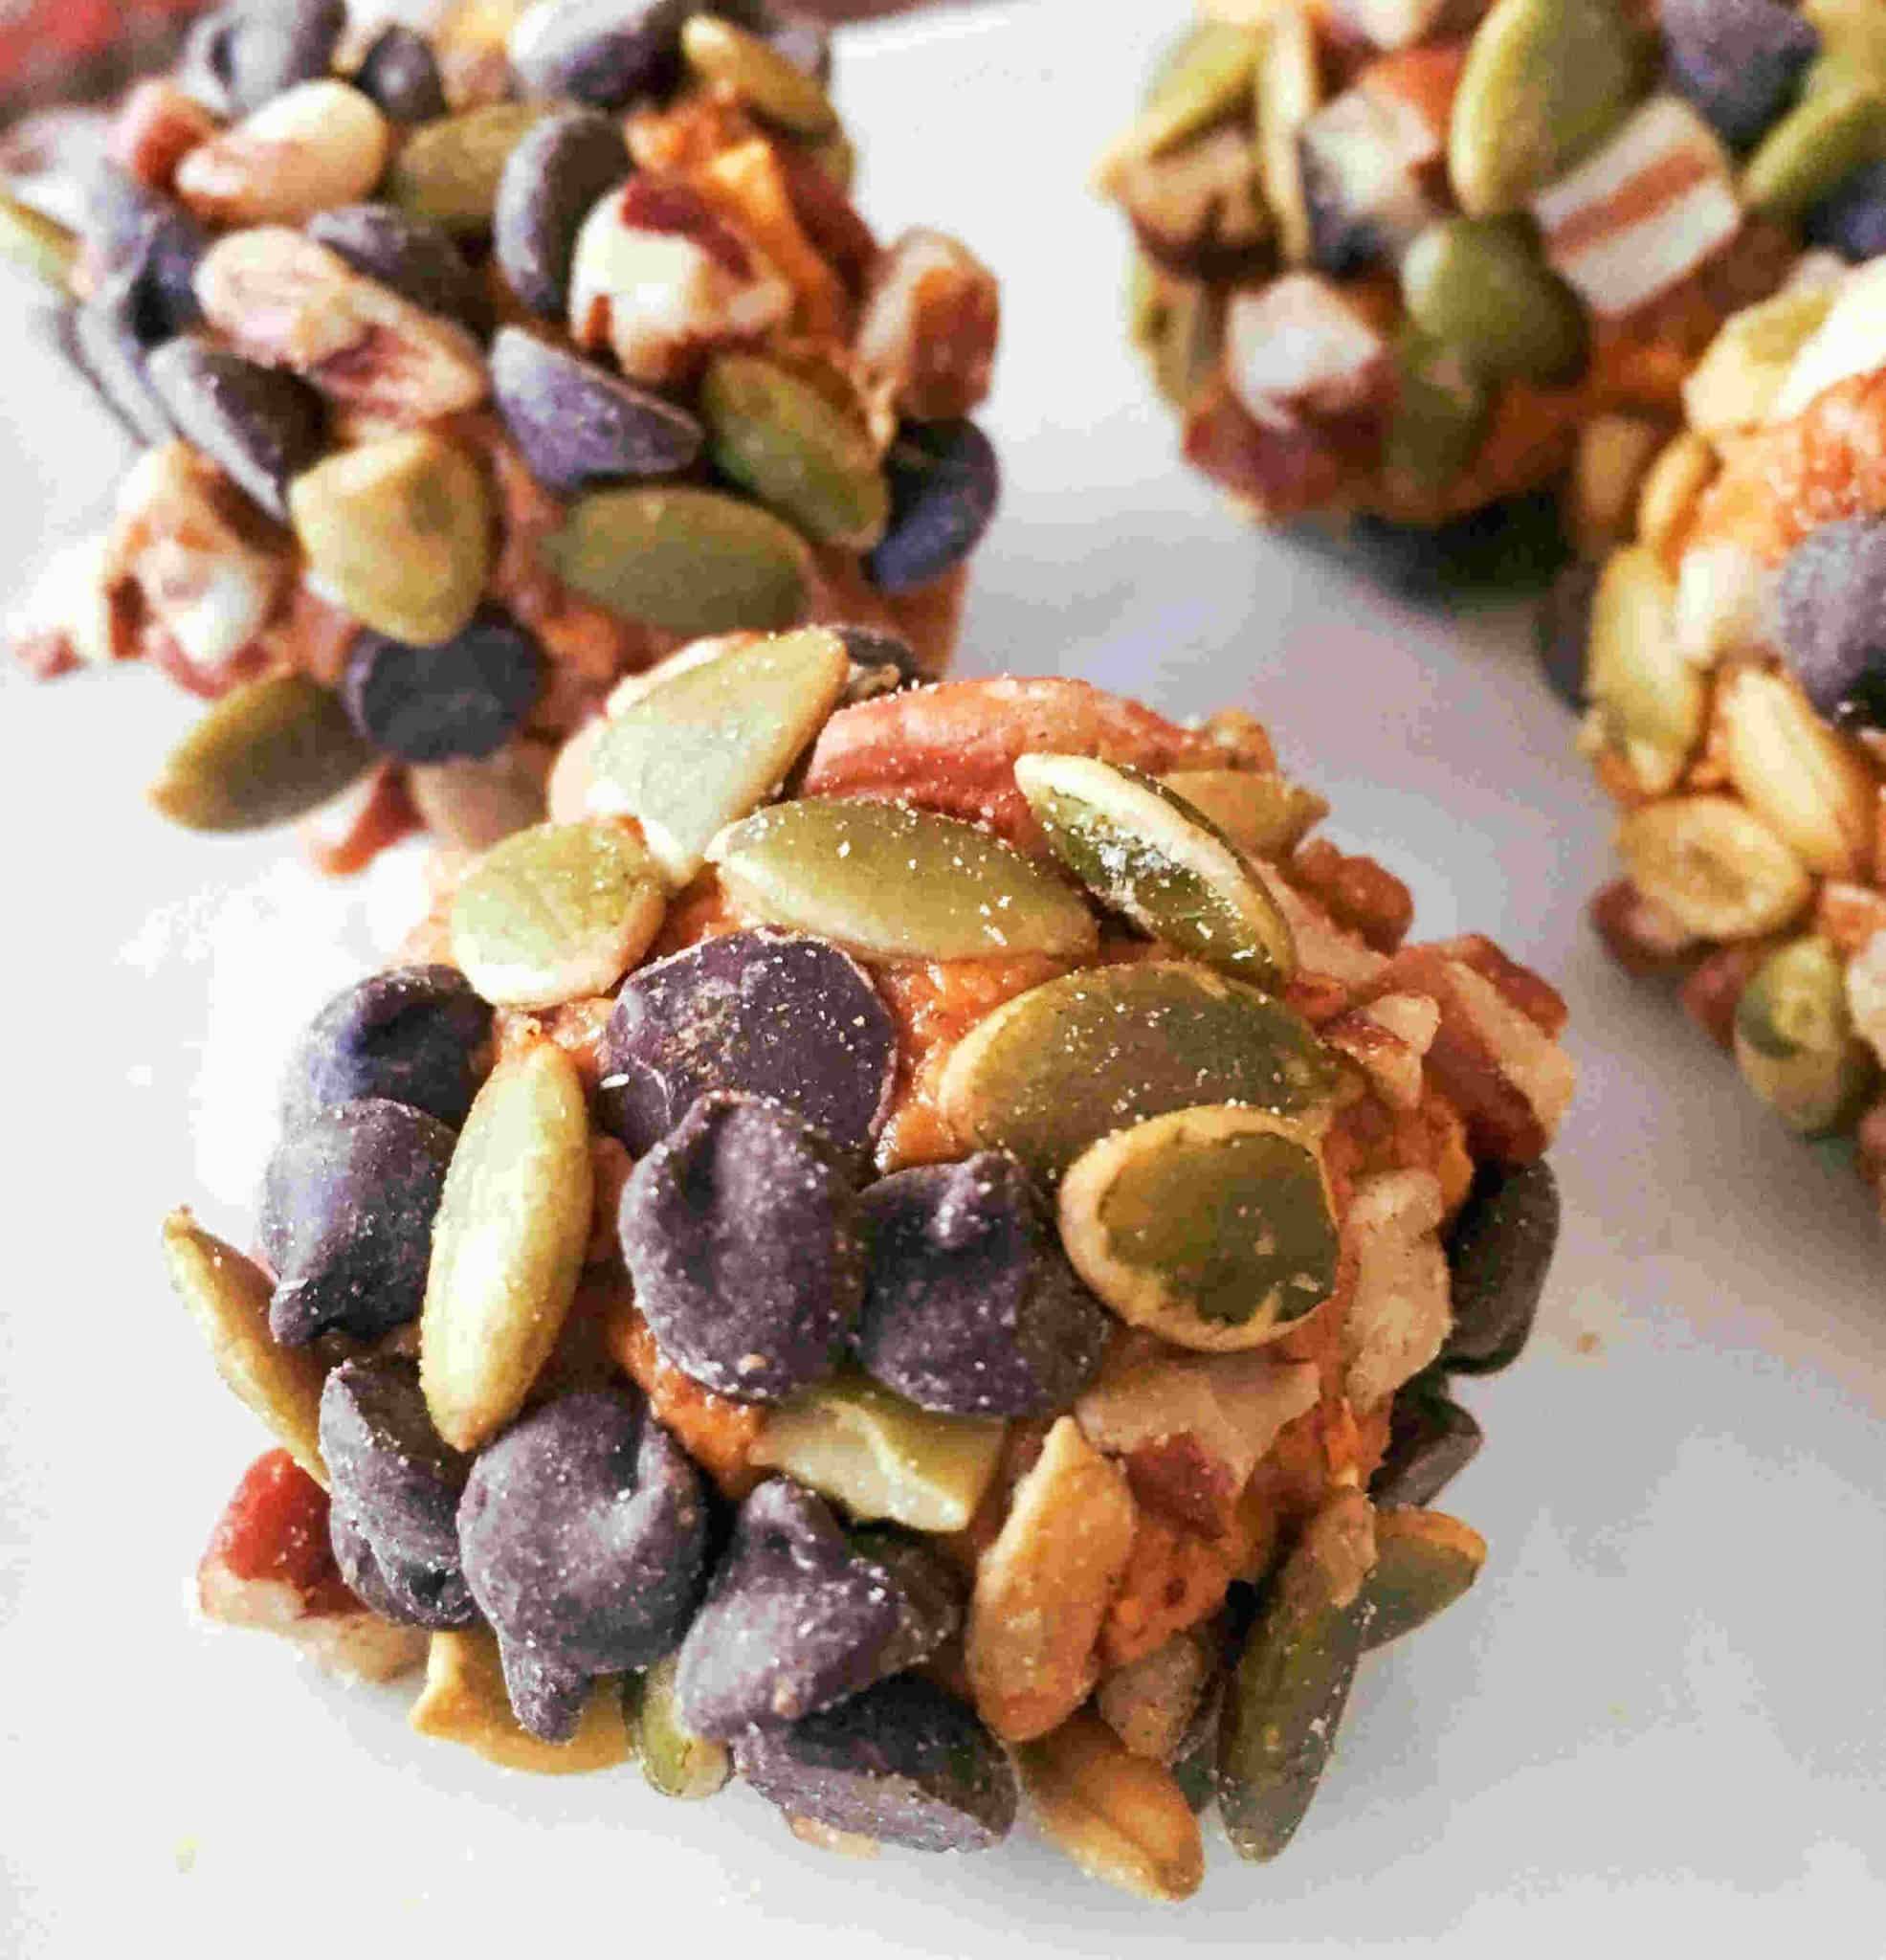 pumpkin seed with nuts and chocolate snack - gluten free dairy free ...